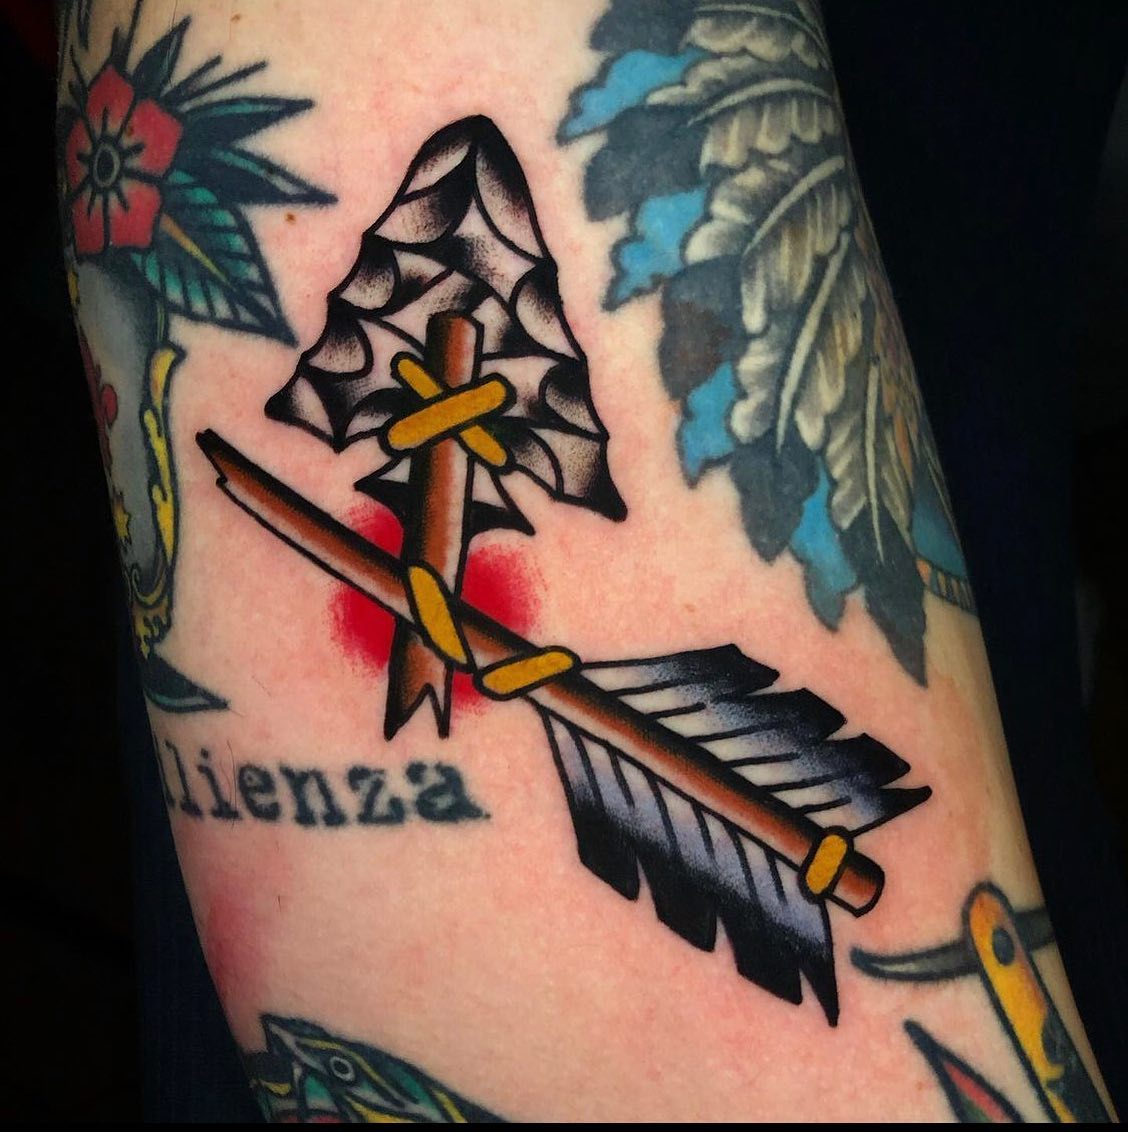 Tattoo of Arrows, Weapons